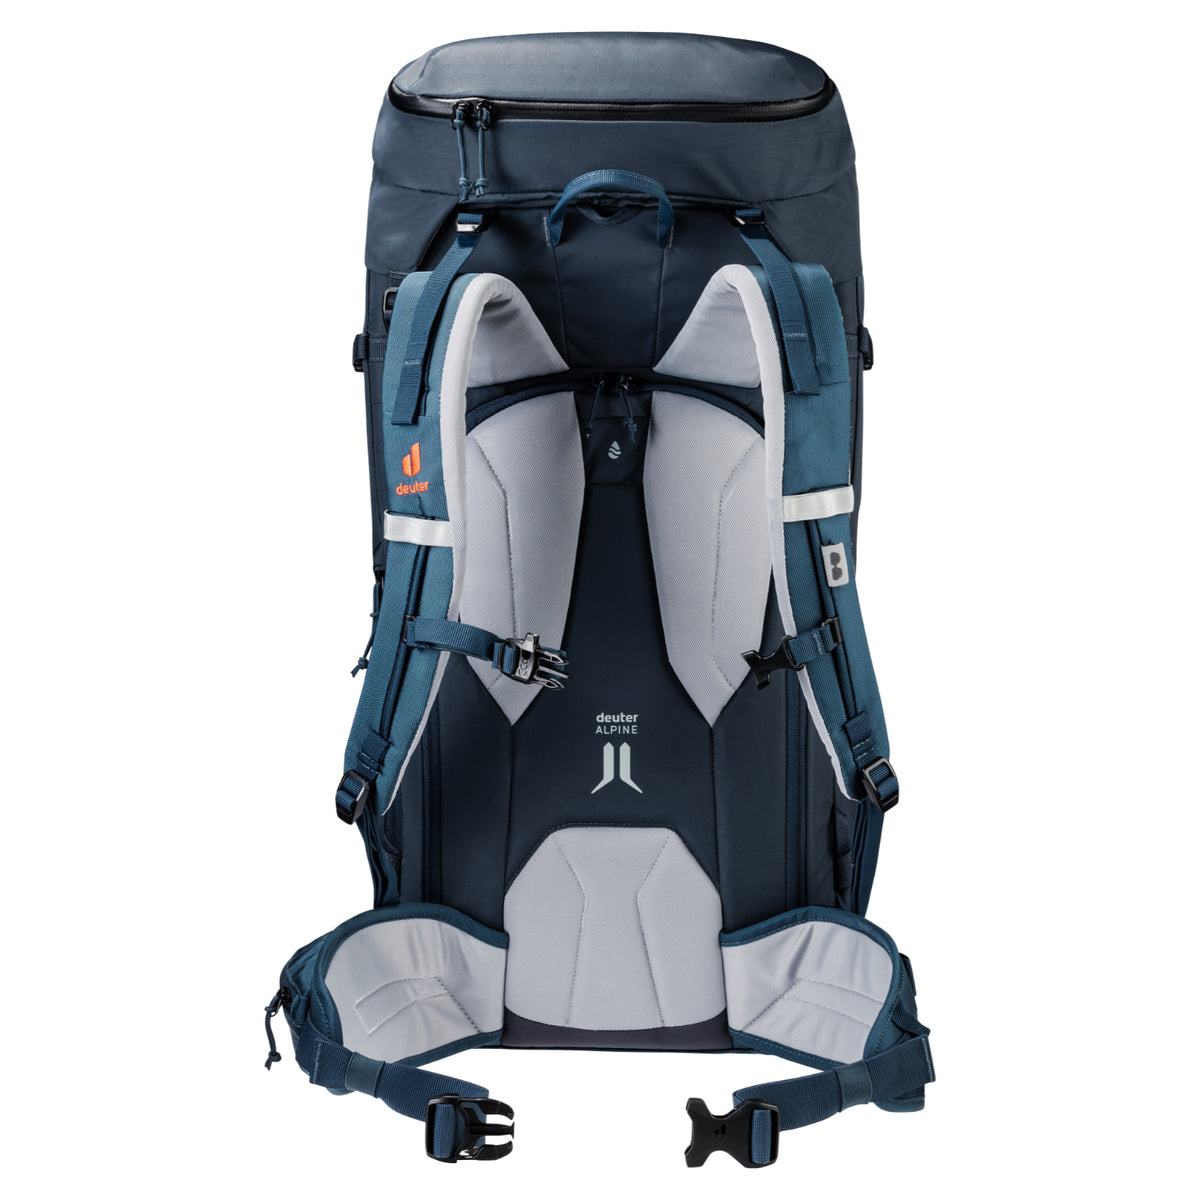 Deuter Freescape Pro 40+ rucksack in ink blue, from the back.